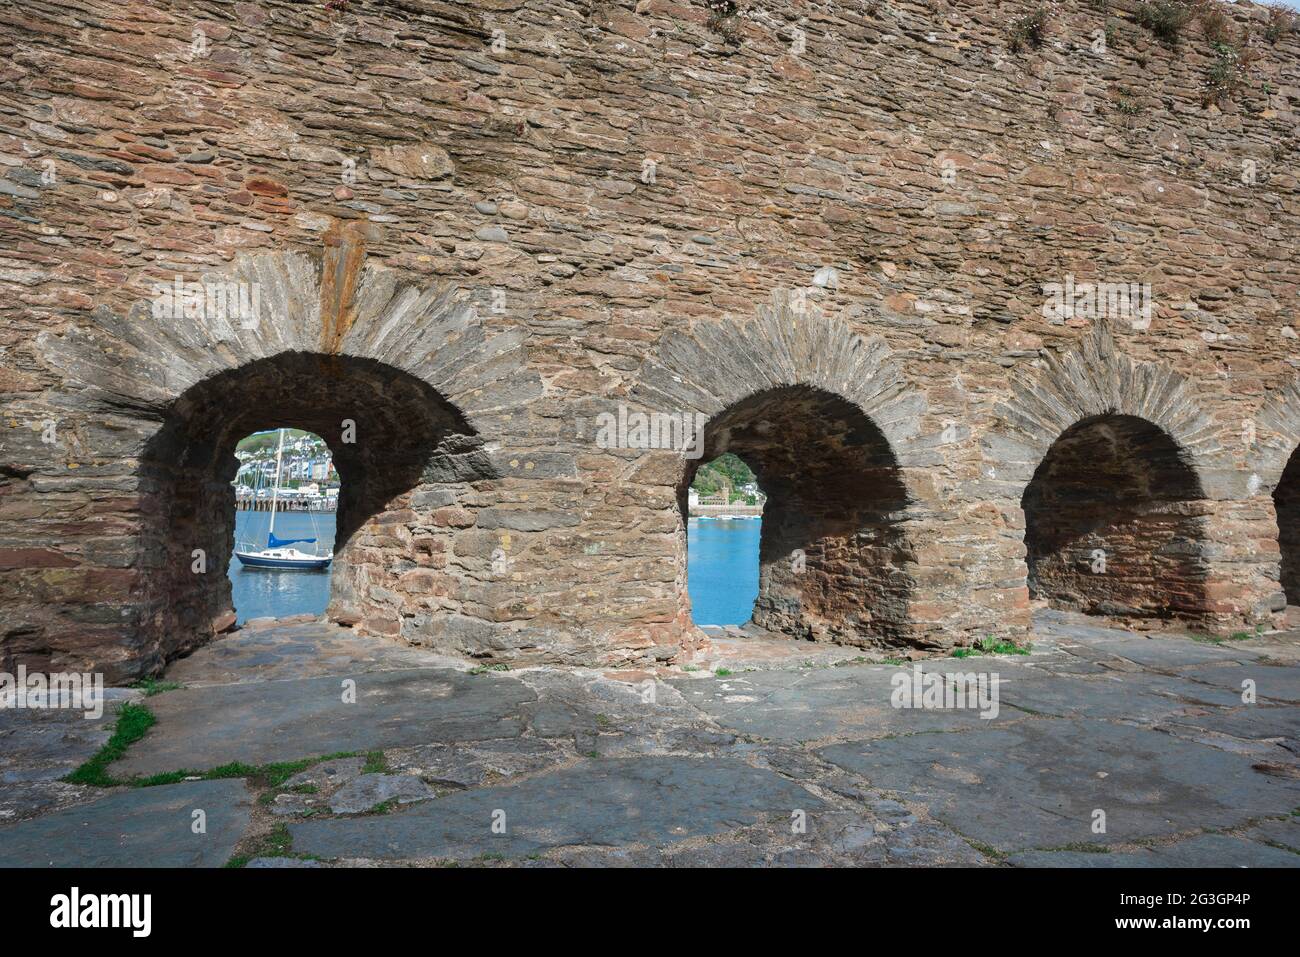 Bayard's Cove Fort, view of the firing holes, or embrasures, inside the remains of the Tudor era Bayard's Cove Fort above the River Dart, Dartmouth UK Stock Photo